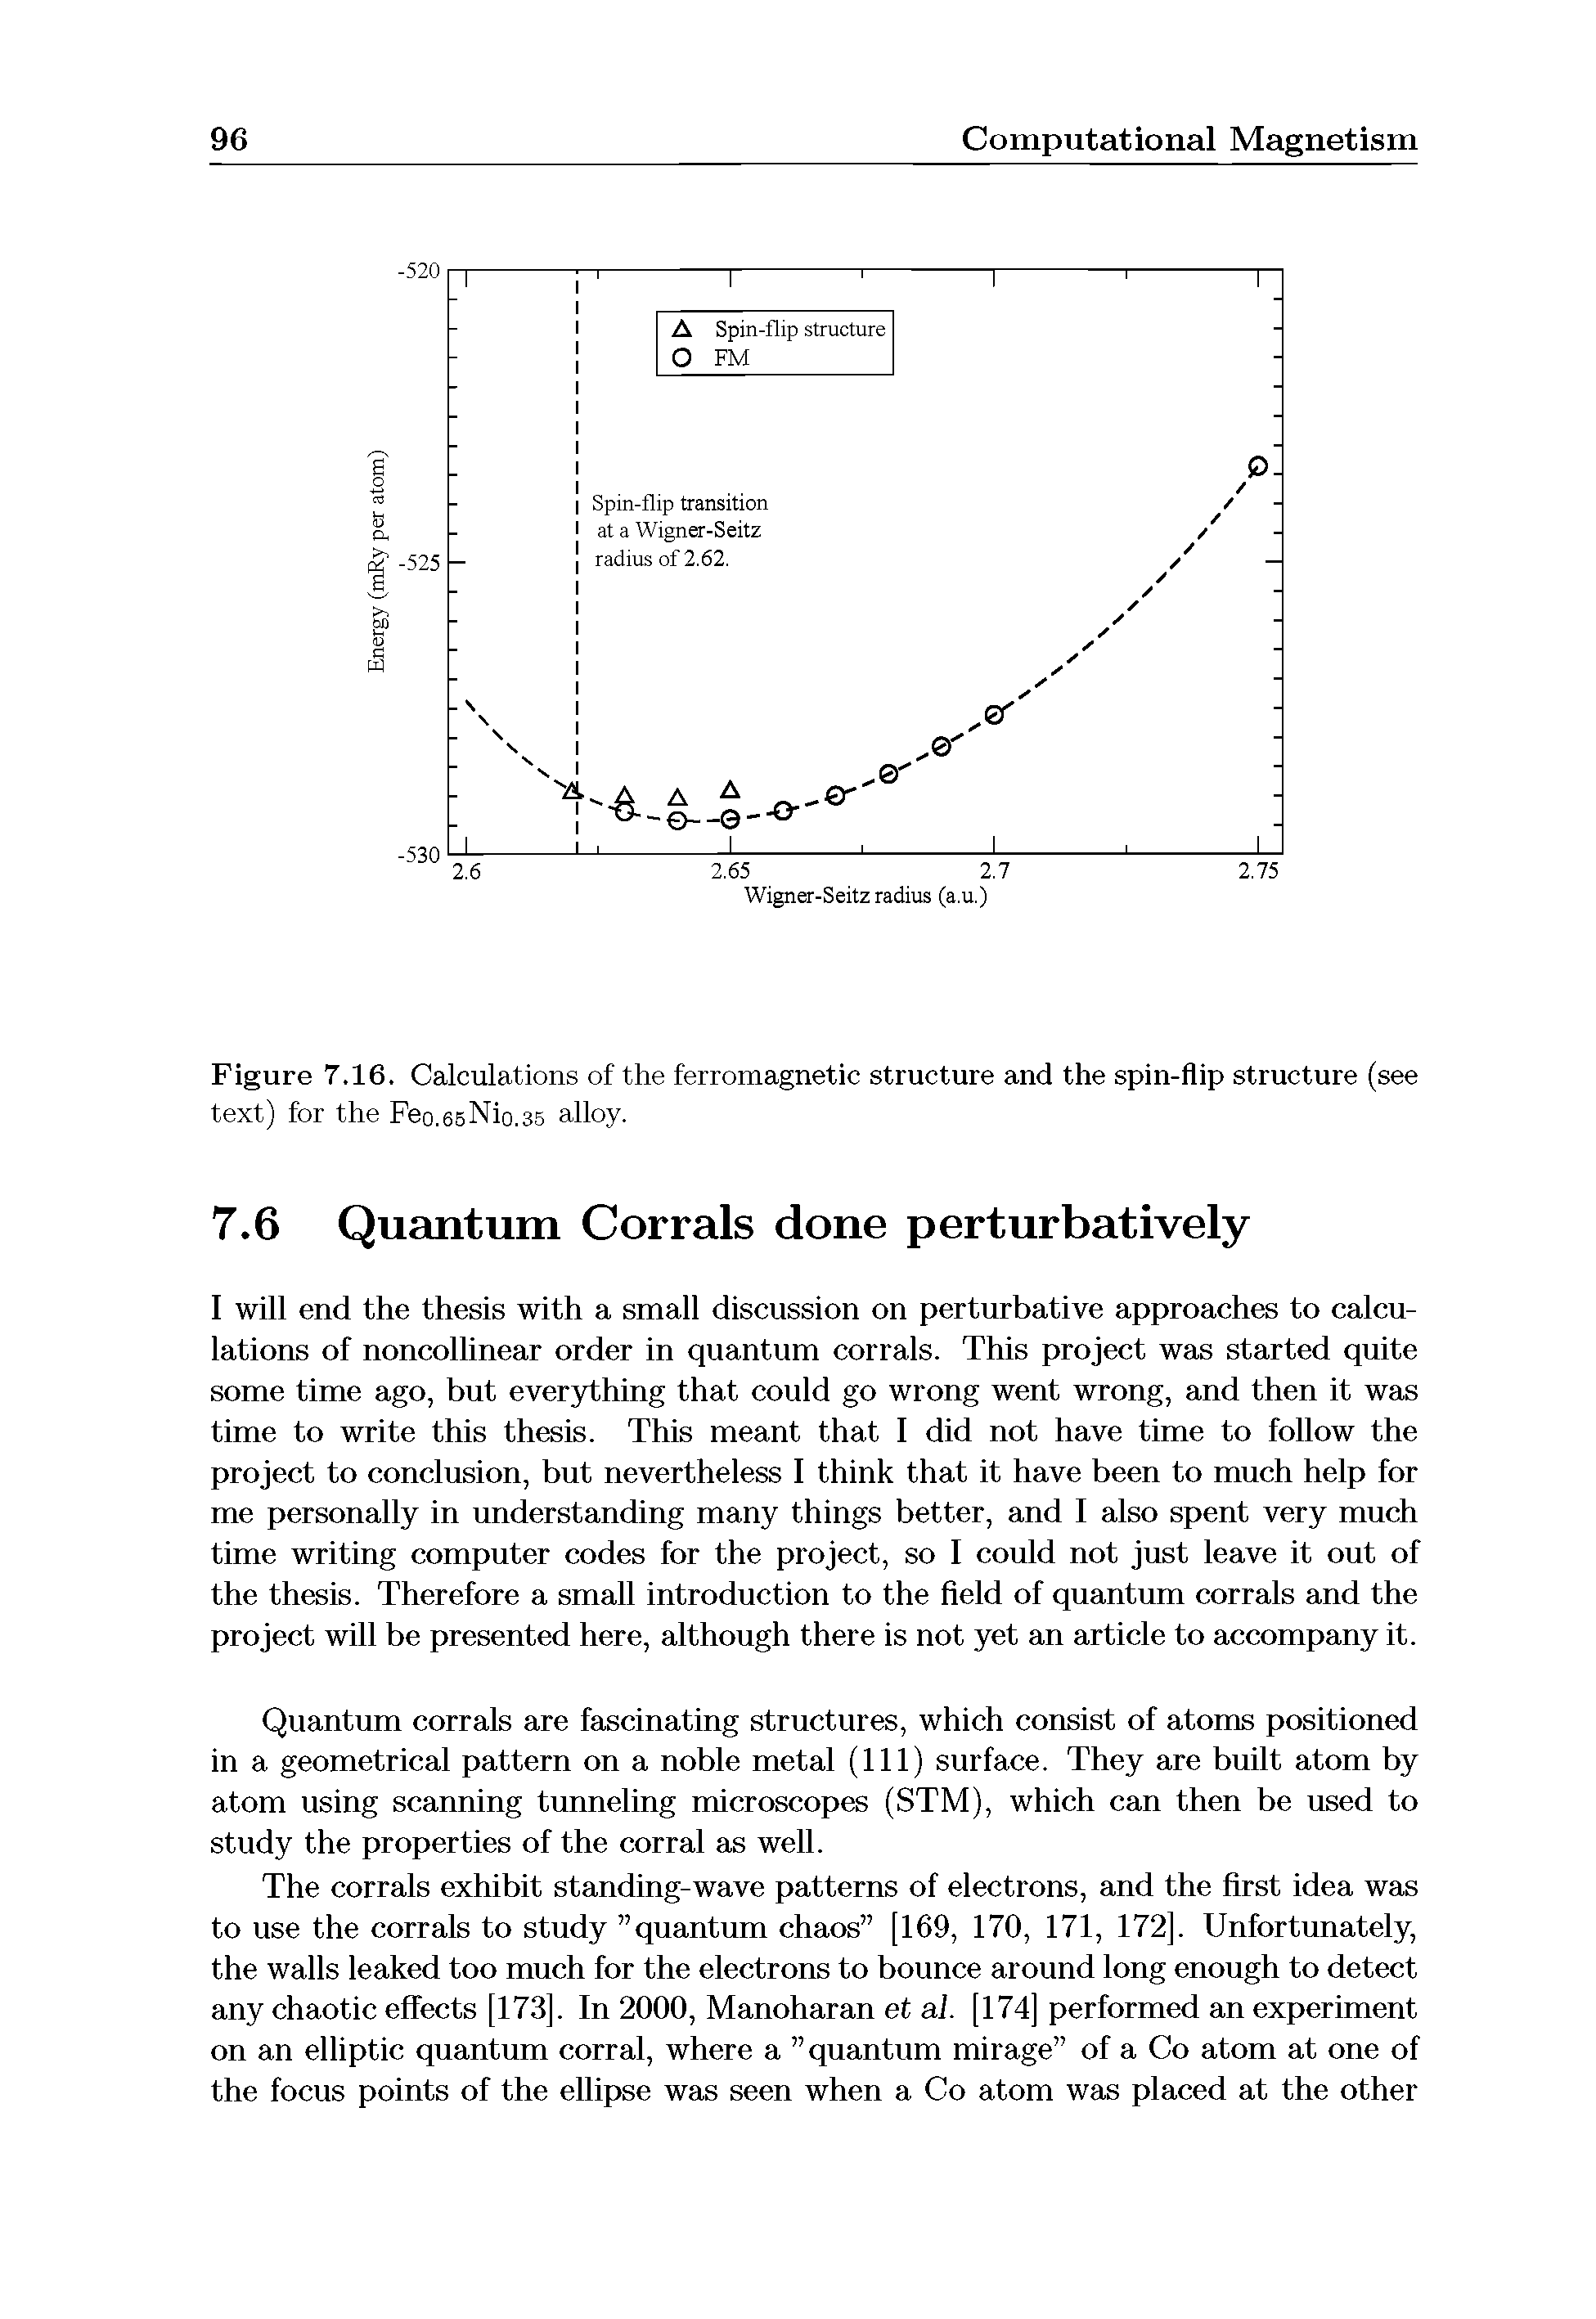 Figure 7.16. Calculations of the ferromagnetic structure and the spin-flip structure (see text) for the Feo.65Nio.35 alloy.